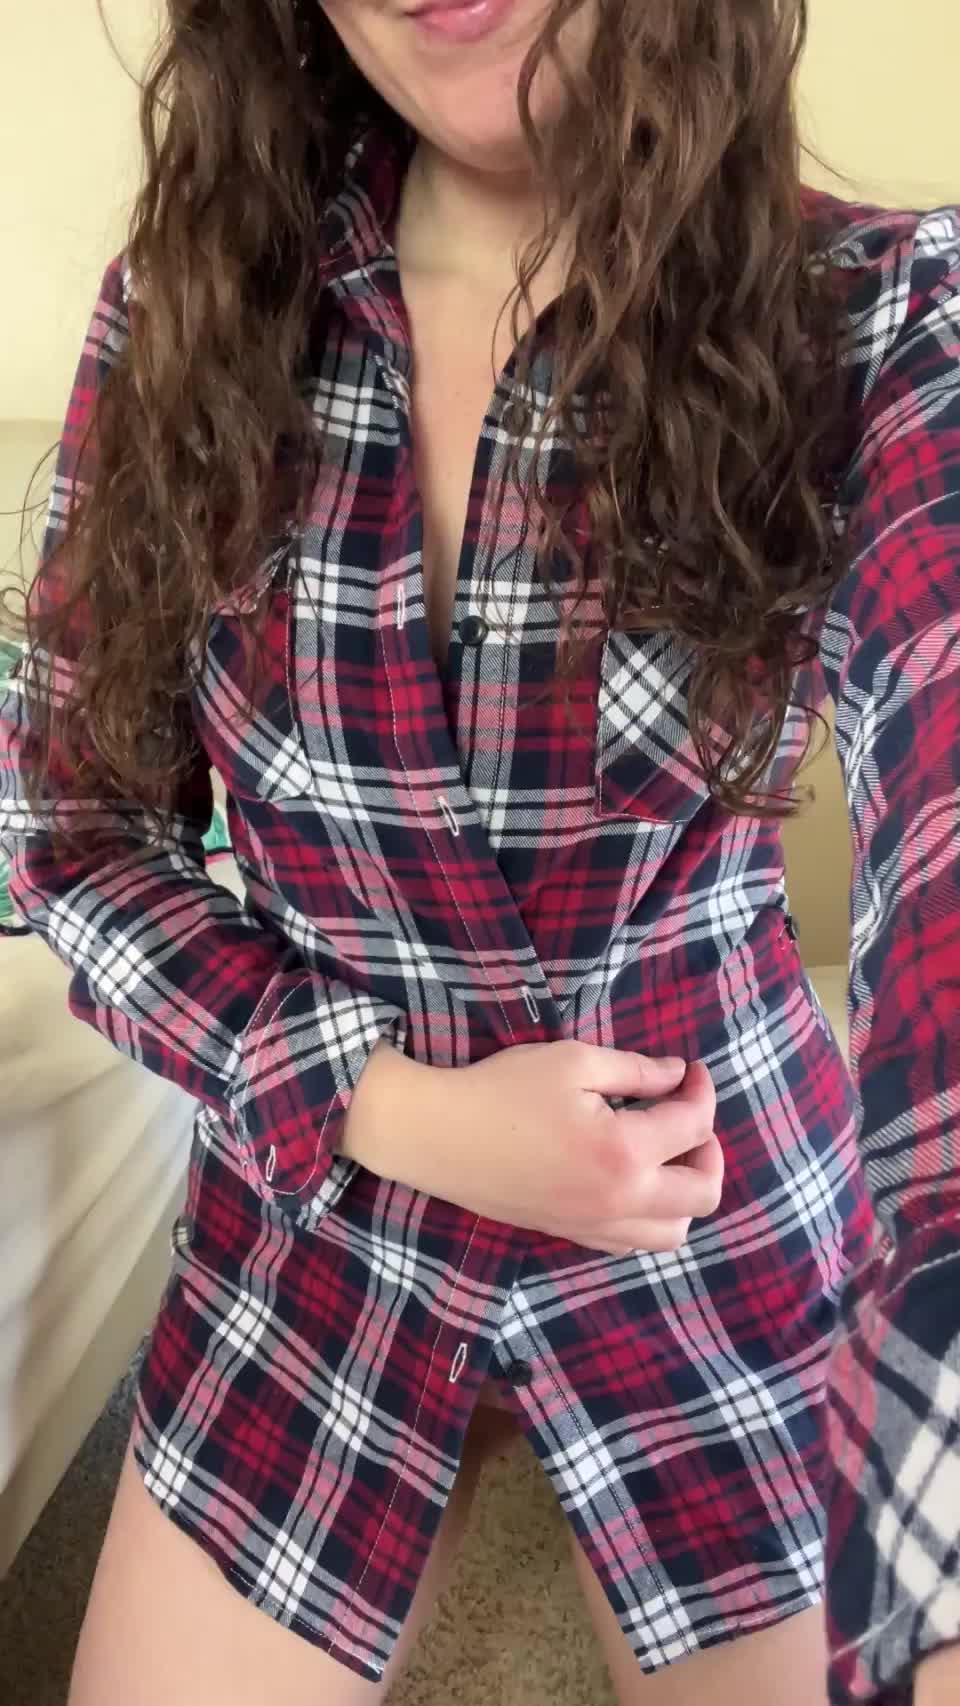 are you into girls in just flannels? :) : video clip